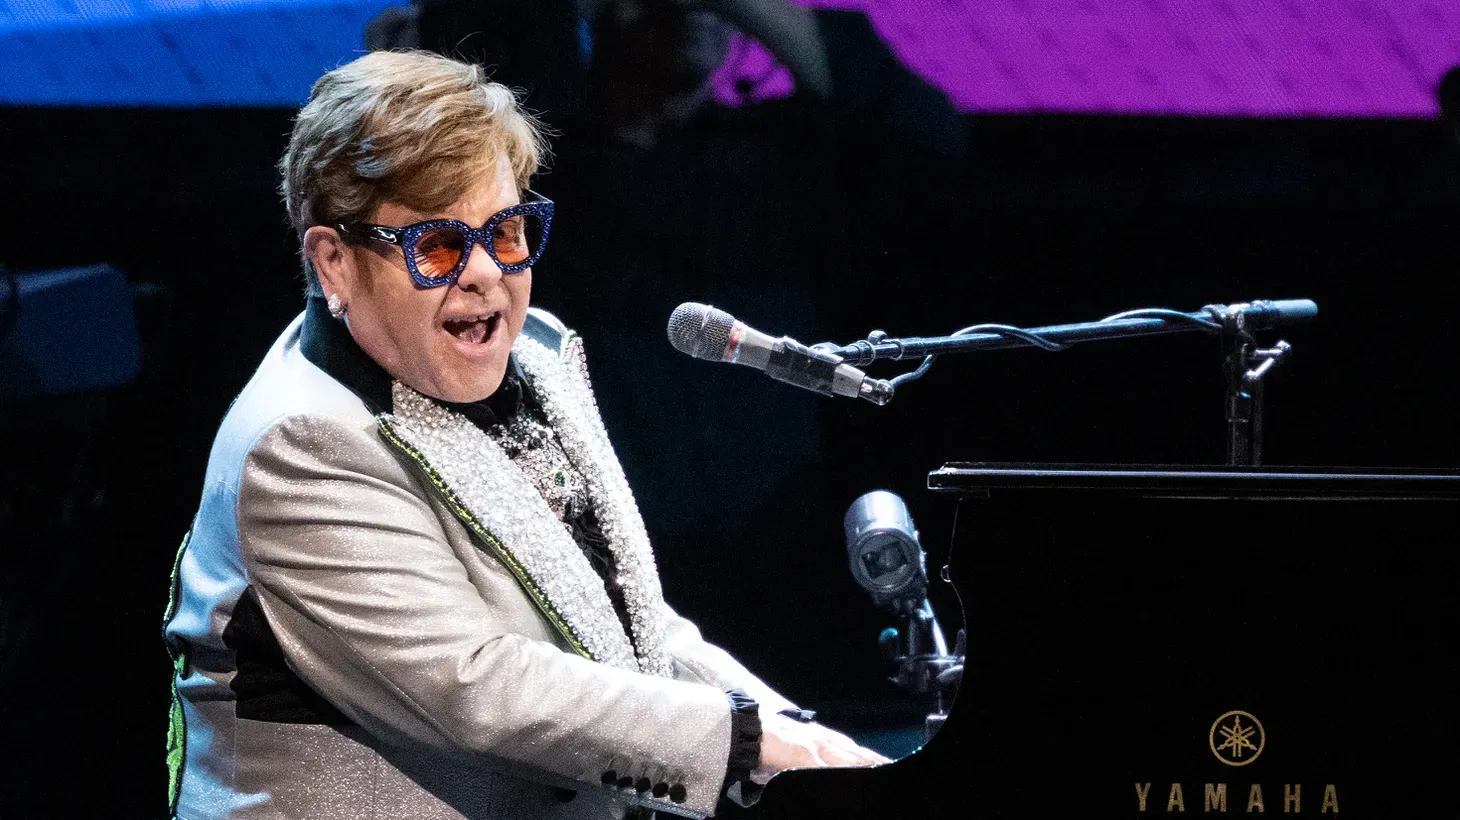 Singer and pianist Elton John sits onstage at the Olympiahalle during a concert as part of his "Farewell Yellow Brick Road Tour 2023."